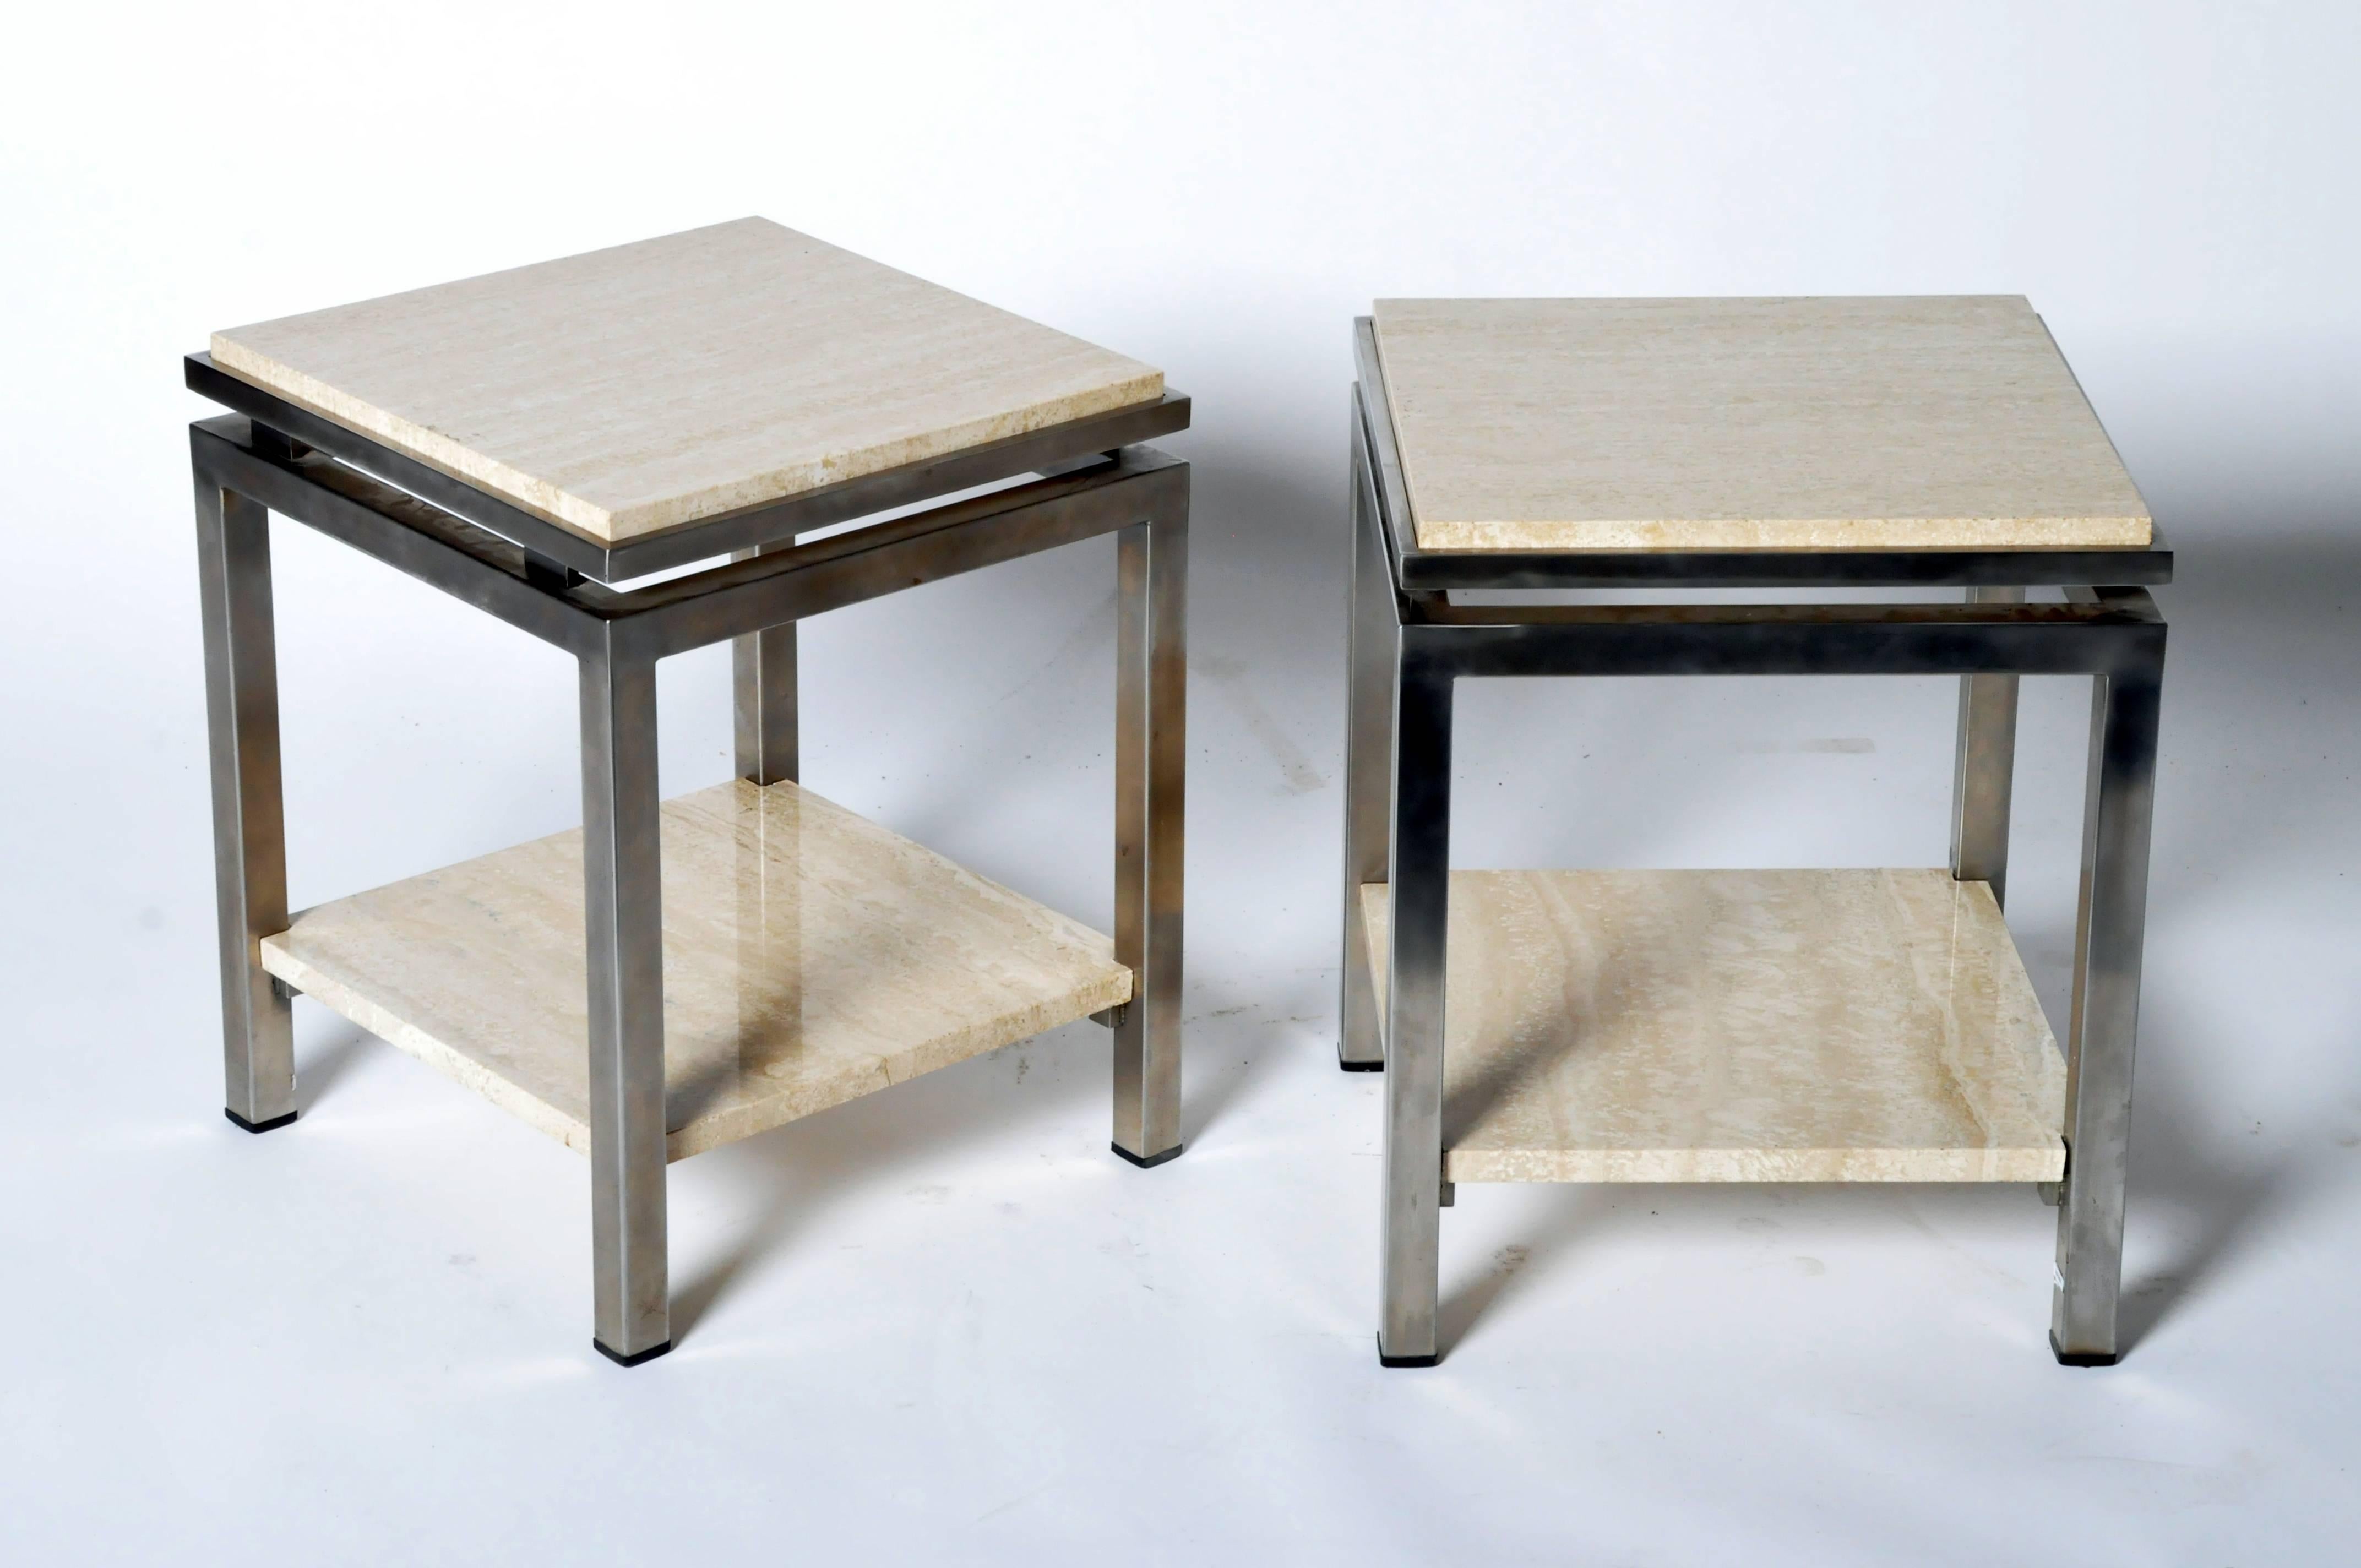 These Mid-Century Modern French end tables have Lefevre’s flair for the exotic as seen in their waisted tops and square-corner frames. Handsome brushed metal encloses the marble inset tops, which surmount the unframed stone shelves below.